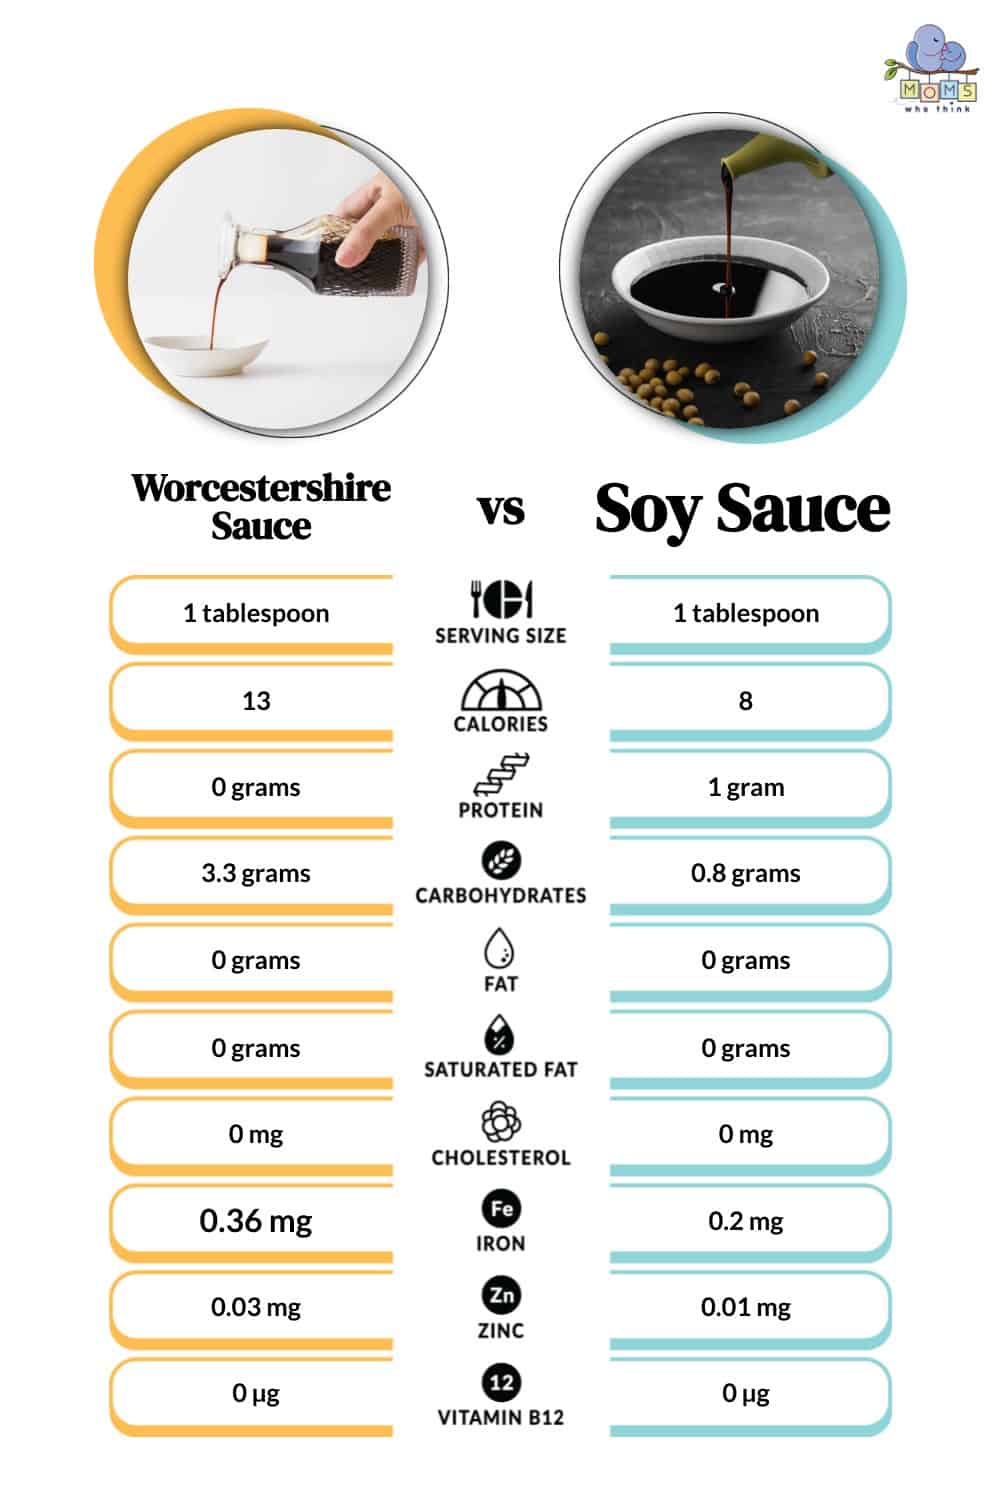 Worcestershire Sauce vs Soy Sauce Nutritional